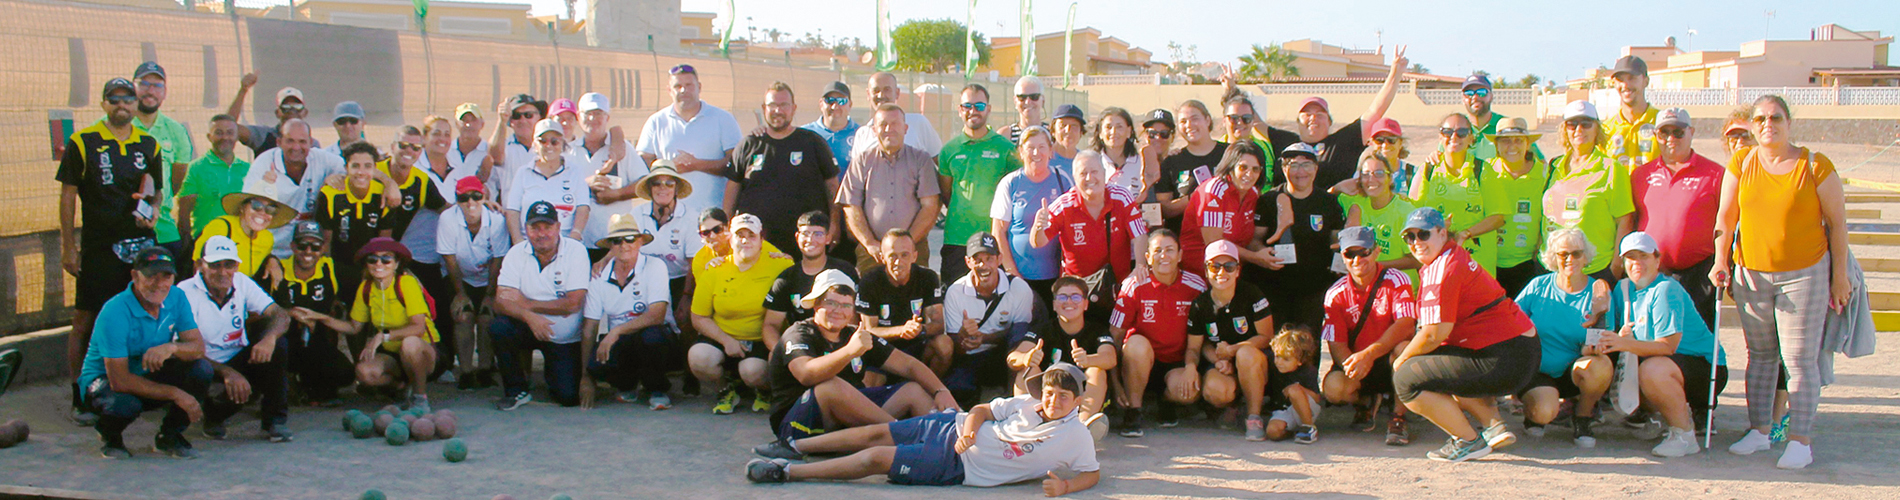 The success of the II Canarian Bowling Tournament creates bonds between the teams from Fuerteventura and Lanzarote